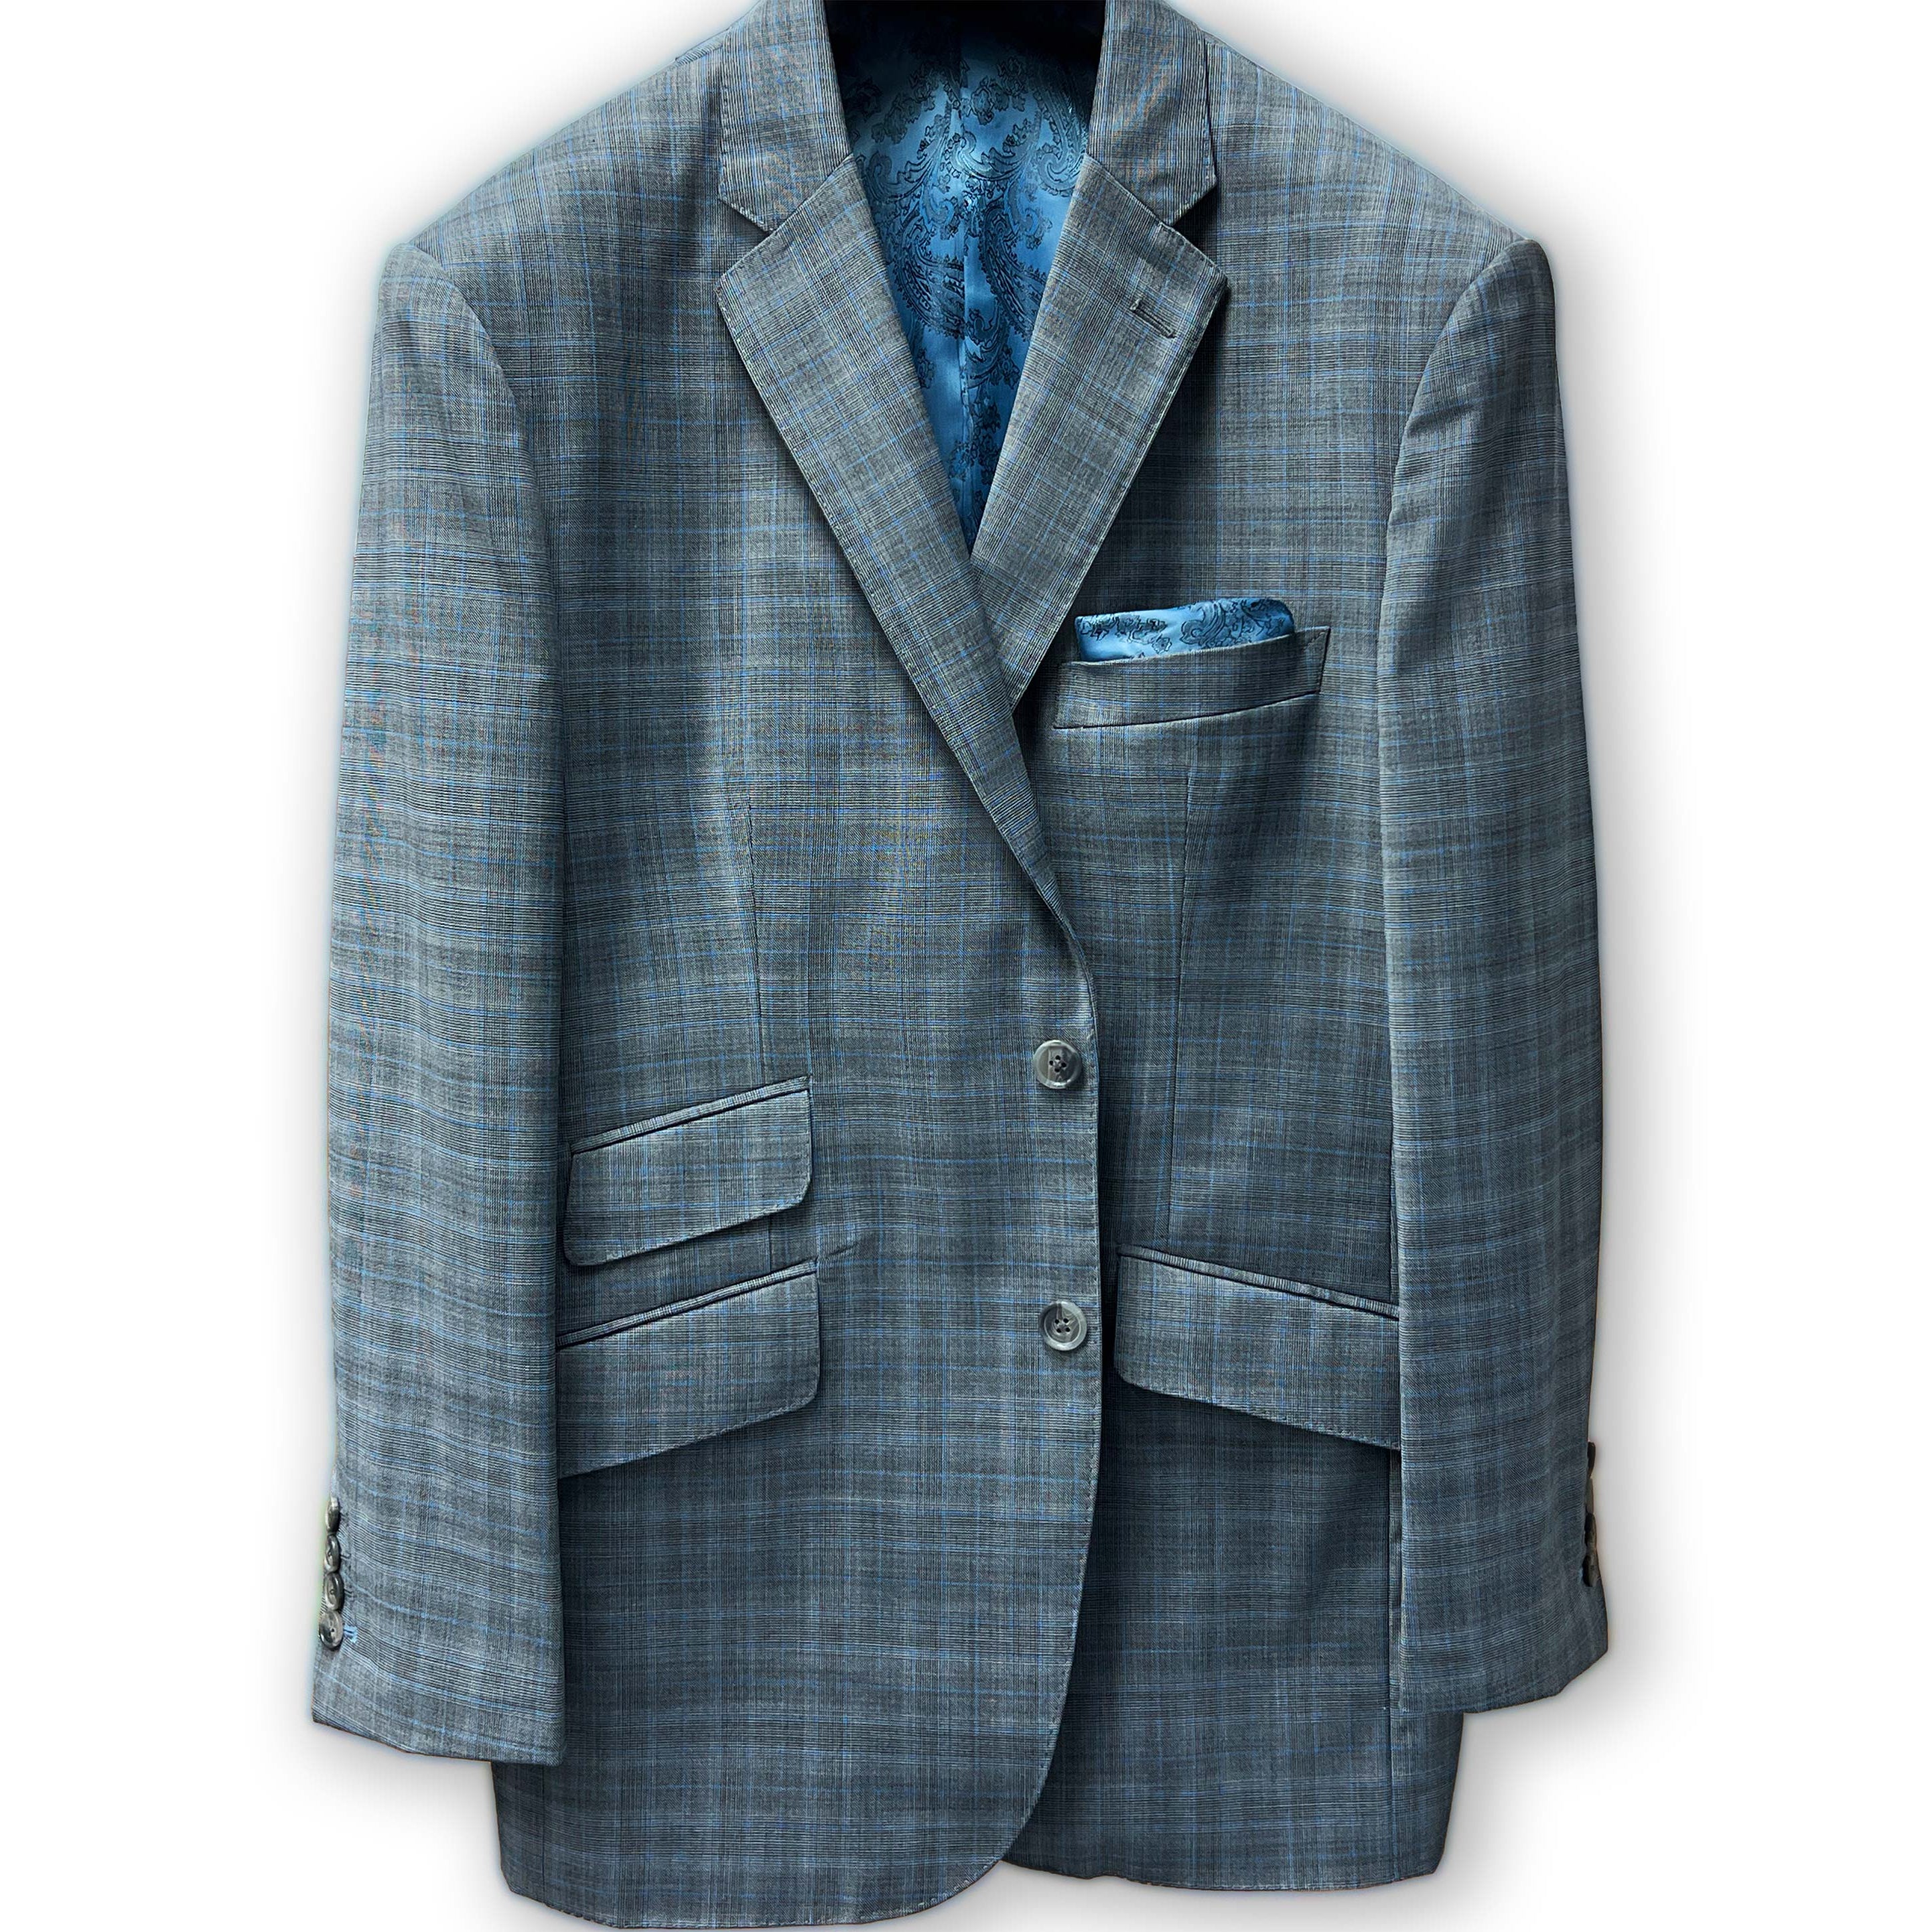 Gray check suit pocket detail, blending style and functionality.